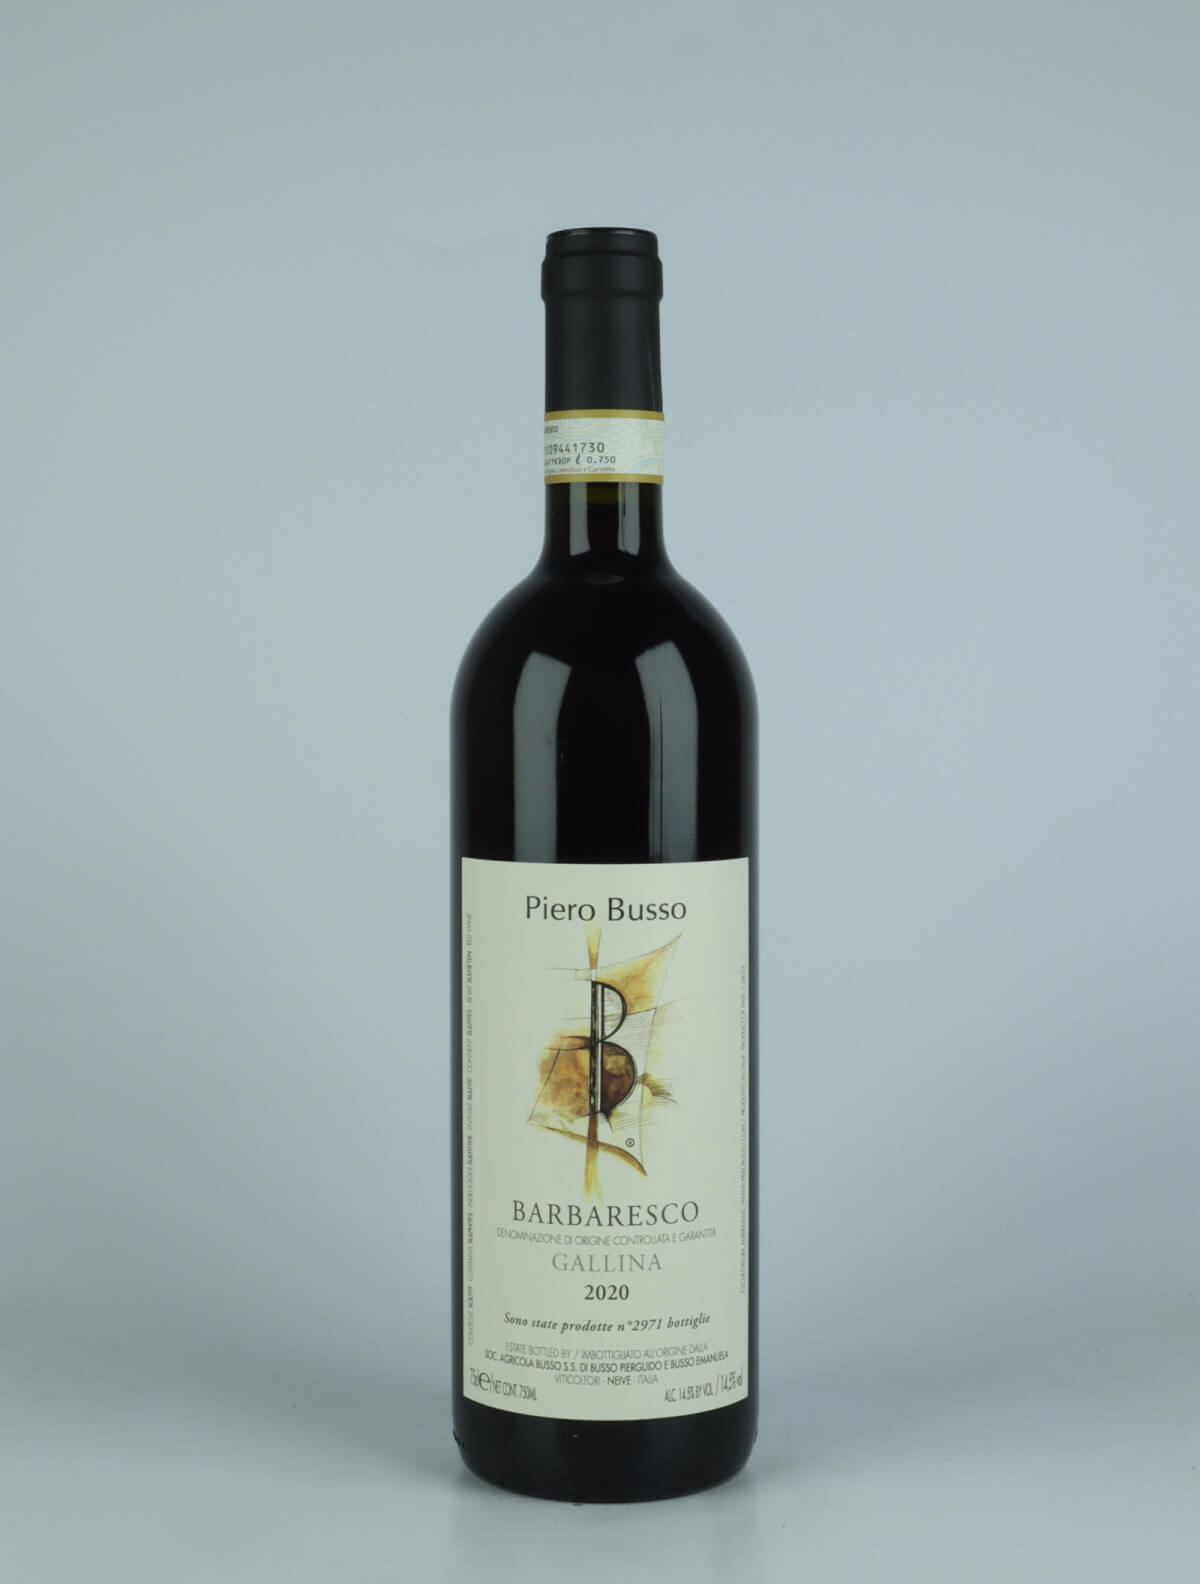 A bottle 2020 Barbaresco Gallina Red wine from Piero Busso, Piedmont in Italy